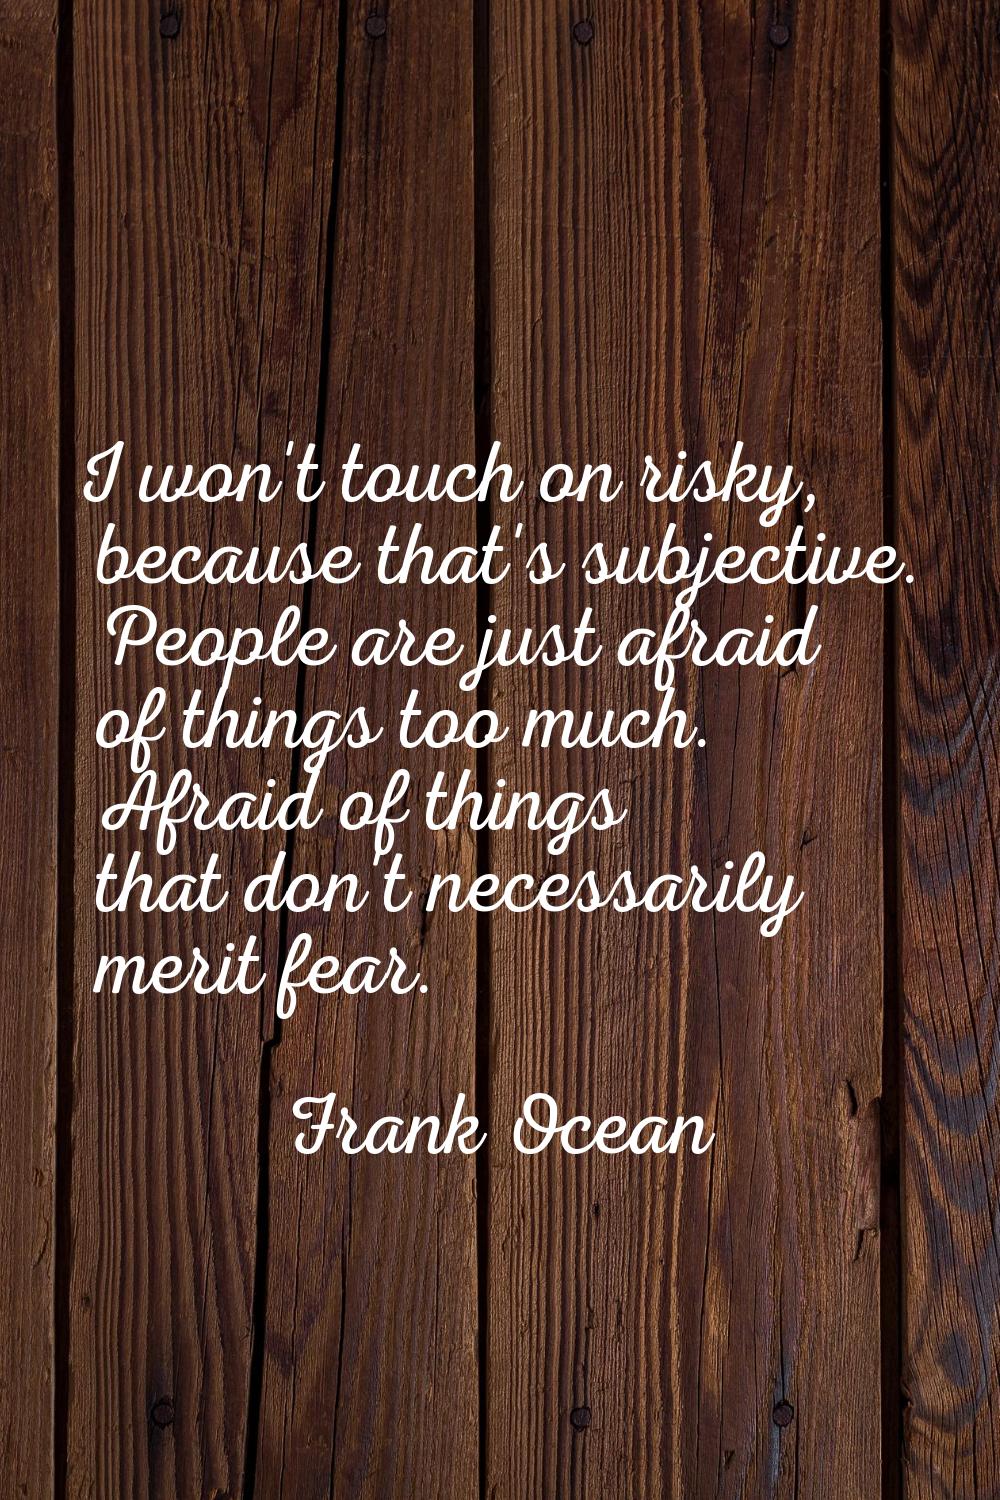 I won't touch on risky, because that's subjective. People are just afraid of things too much. Afrai